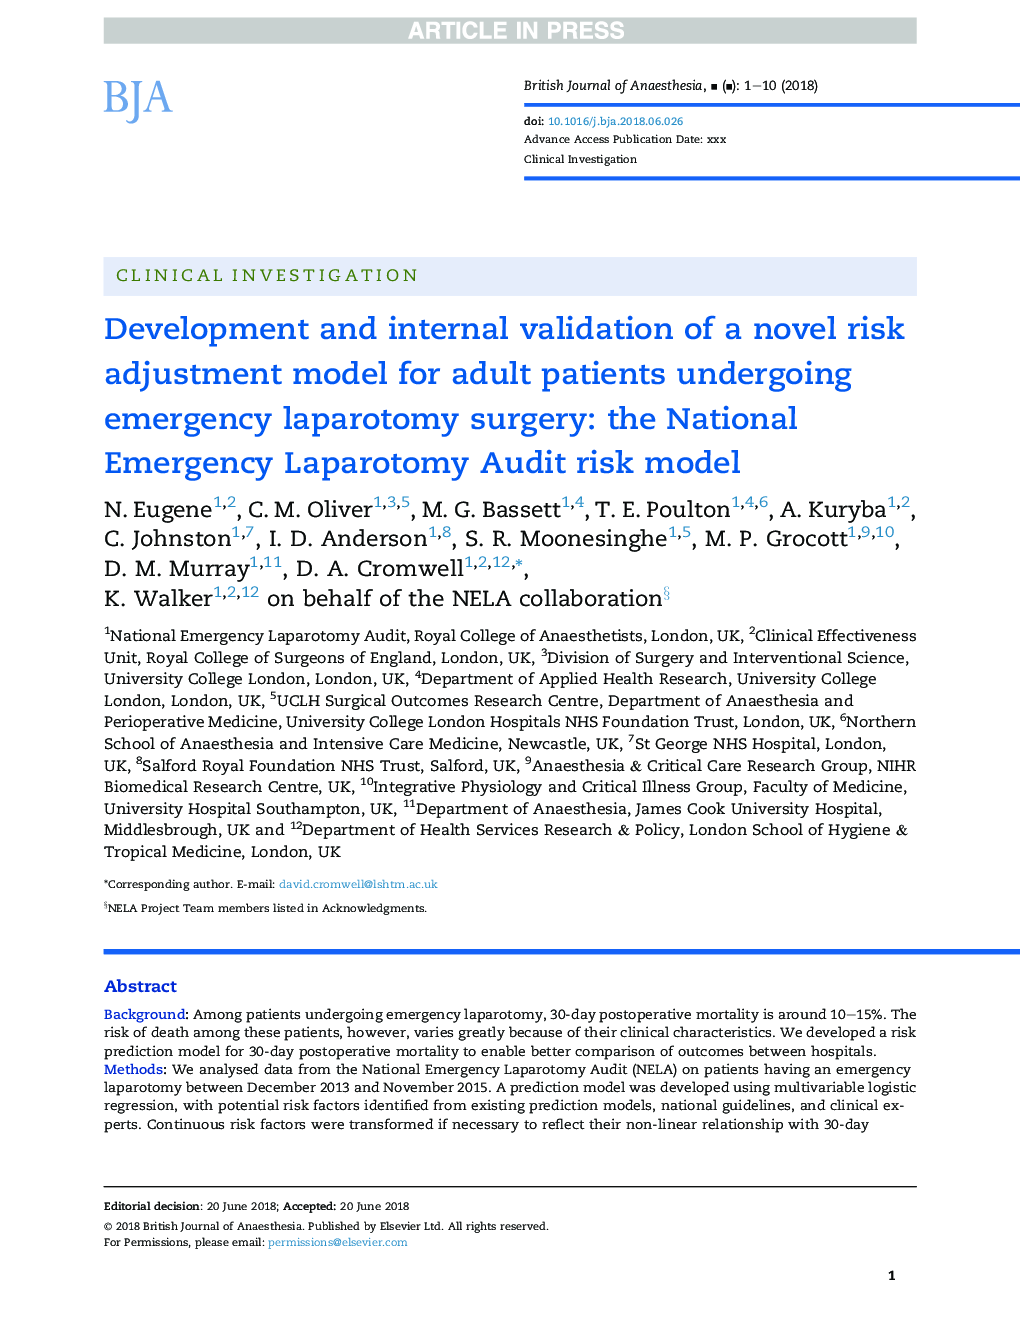 Development and internal validation of a novel risk adjustment model for adult patients undergoing emergency laparotomy surgery: the National Emergency Laparotomy Audit risk model